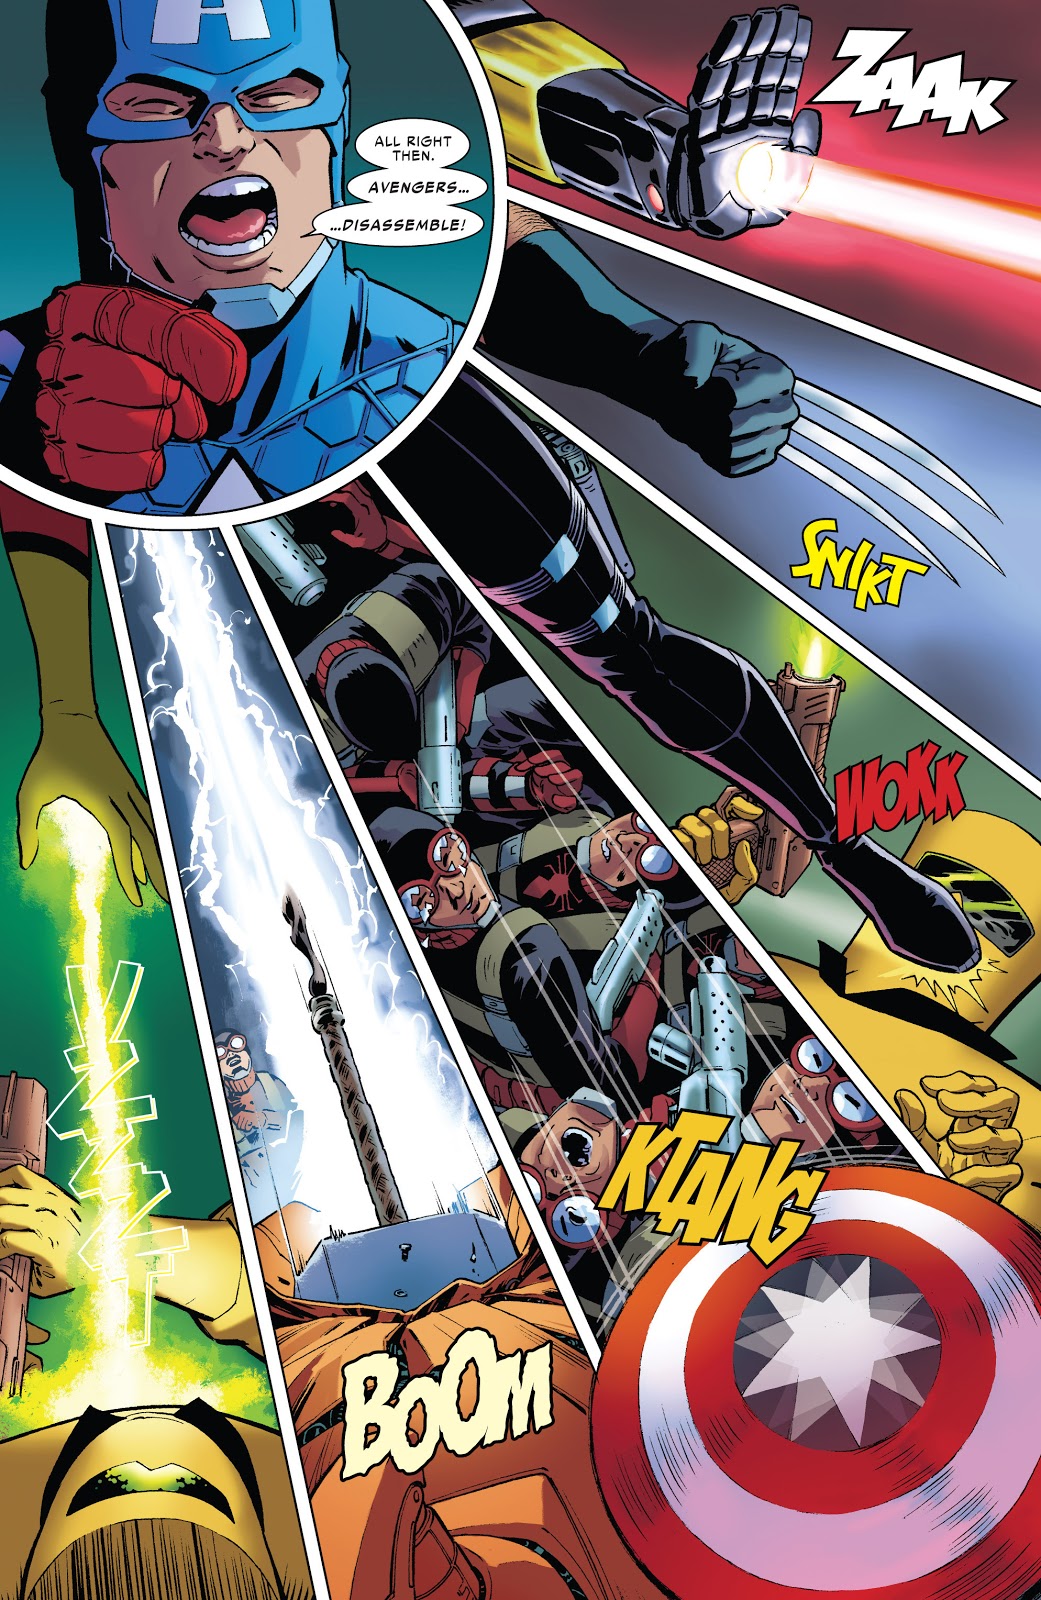 Superior Spider-Man Quits The Avengers 